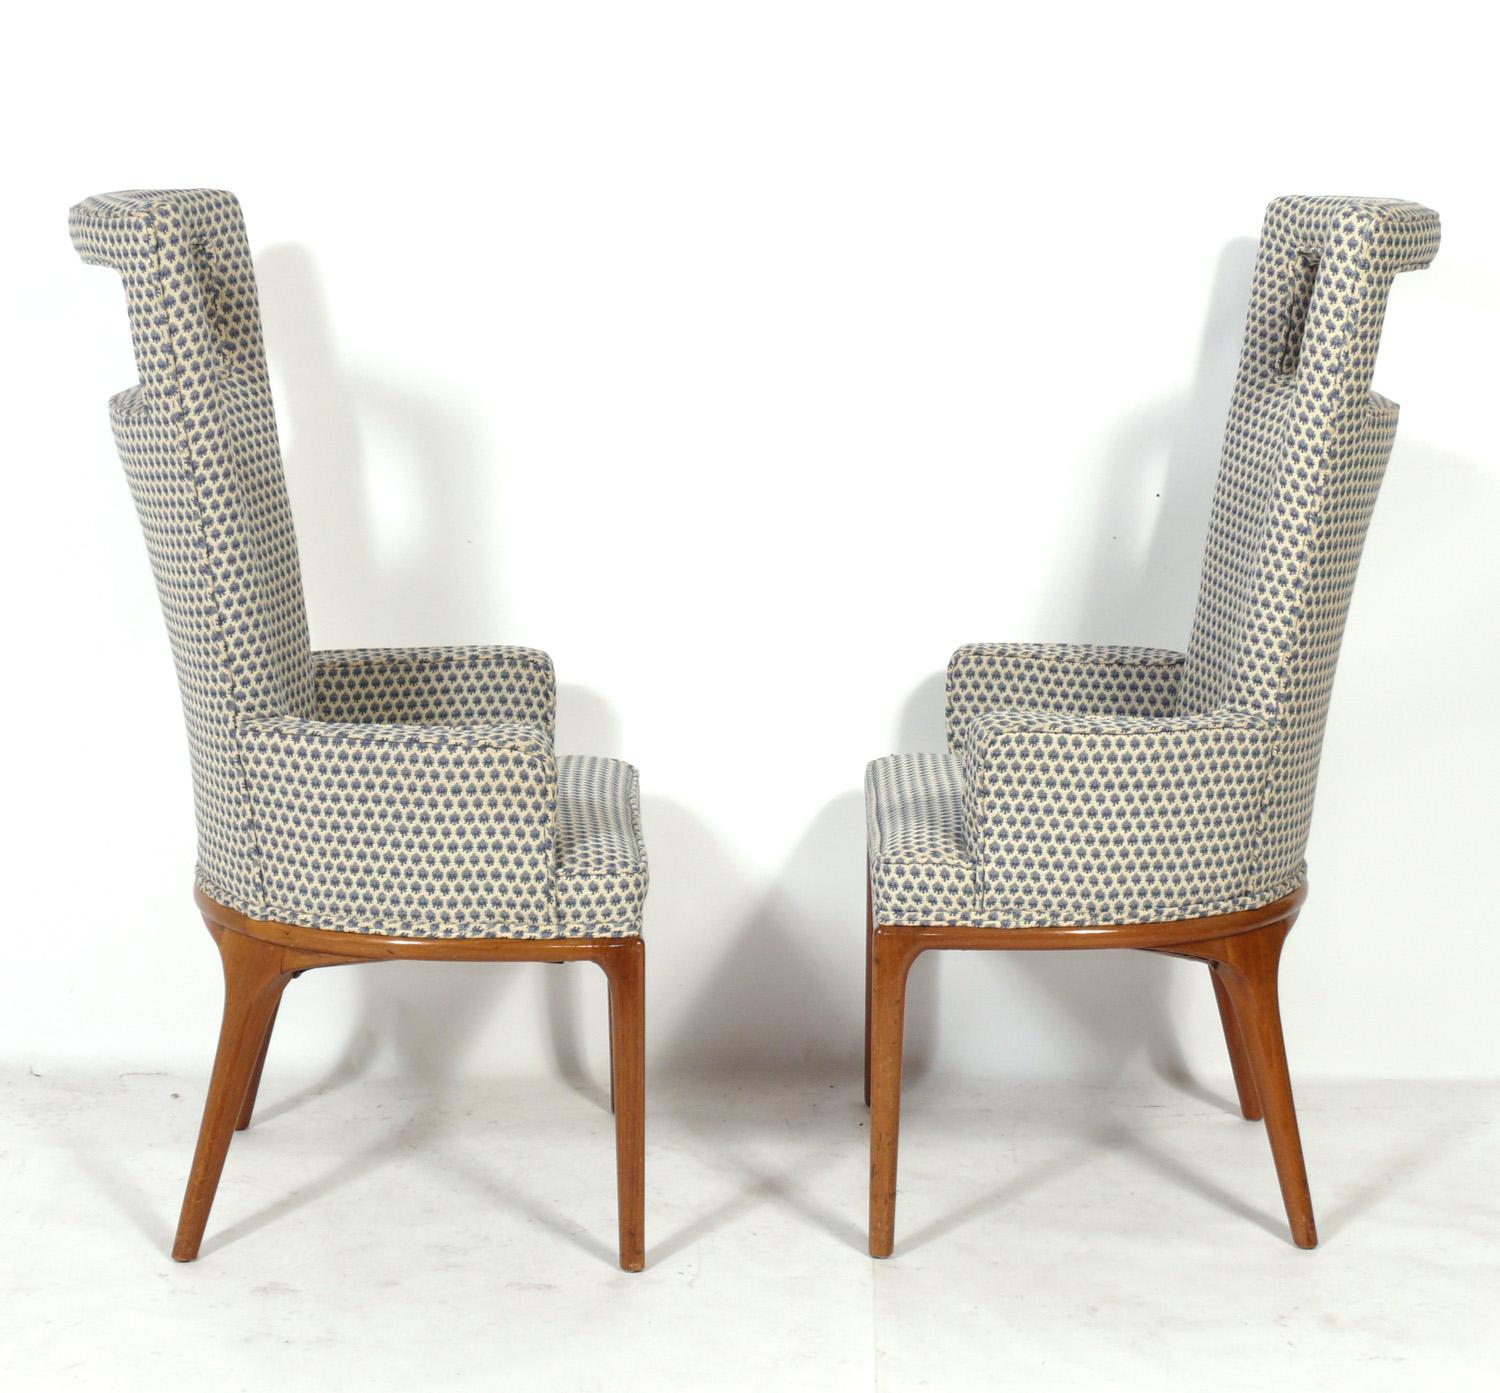 Pair of Elegant Tall Back Mid Century Lounge chairs, designed by Erwin Lambeth for Tomlinson, American, circa 1950s. These chairs are being refinished and reupholstered and can be completed in your choice of wood finish color and reupholstered in